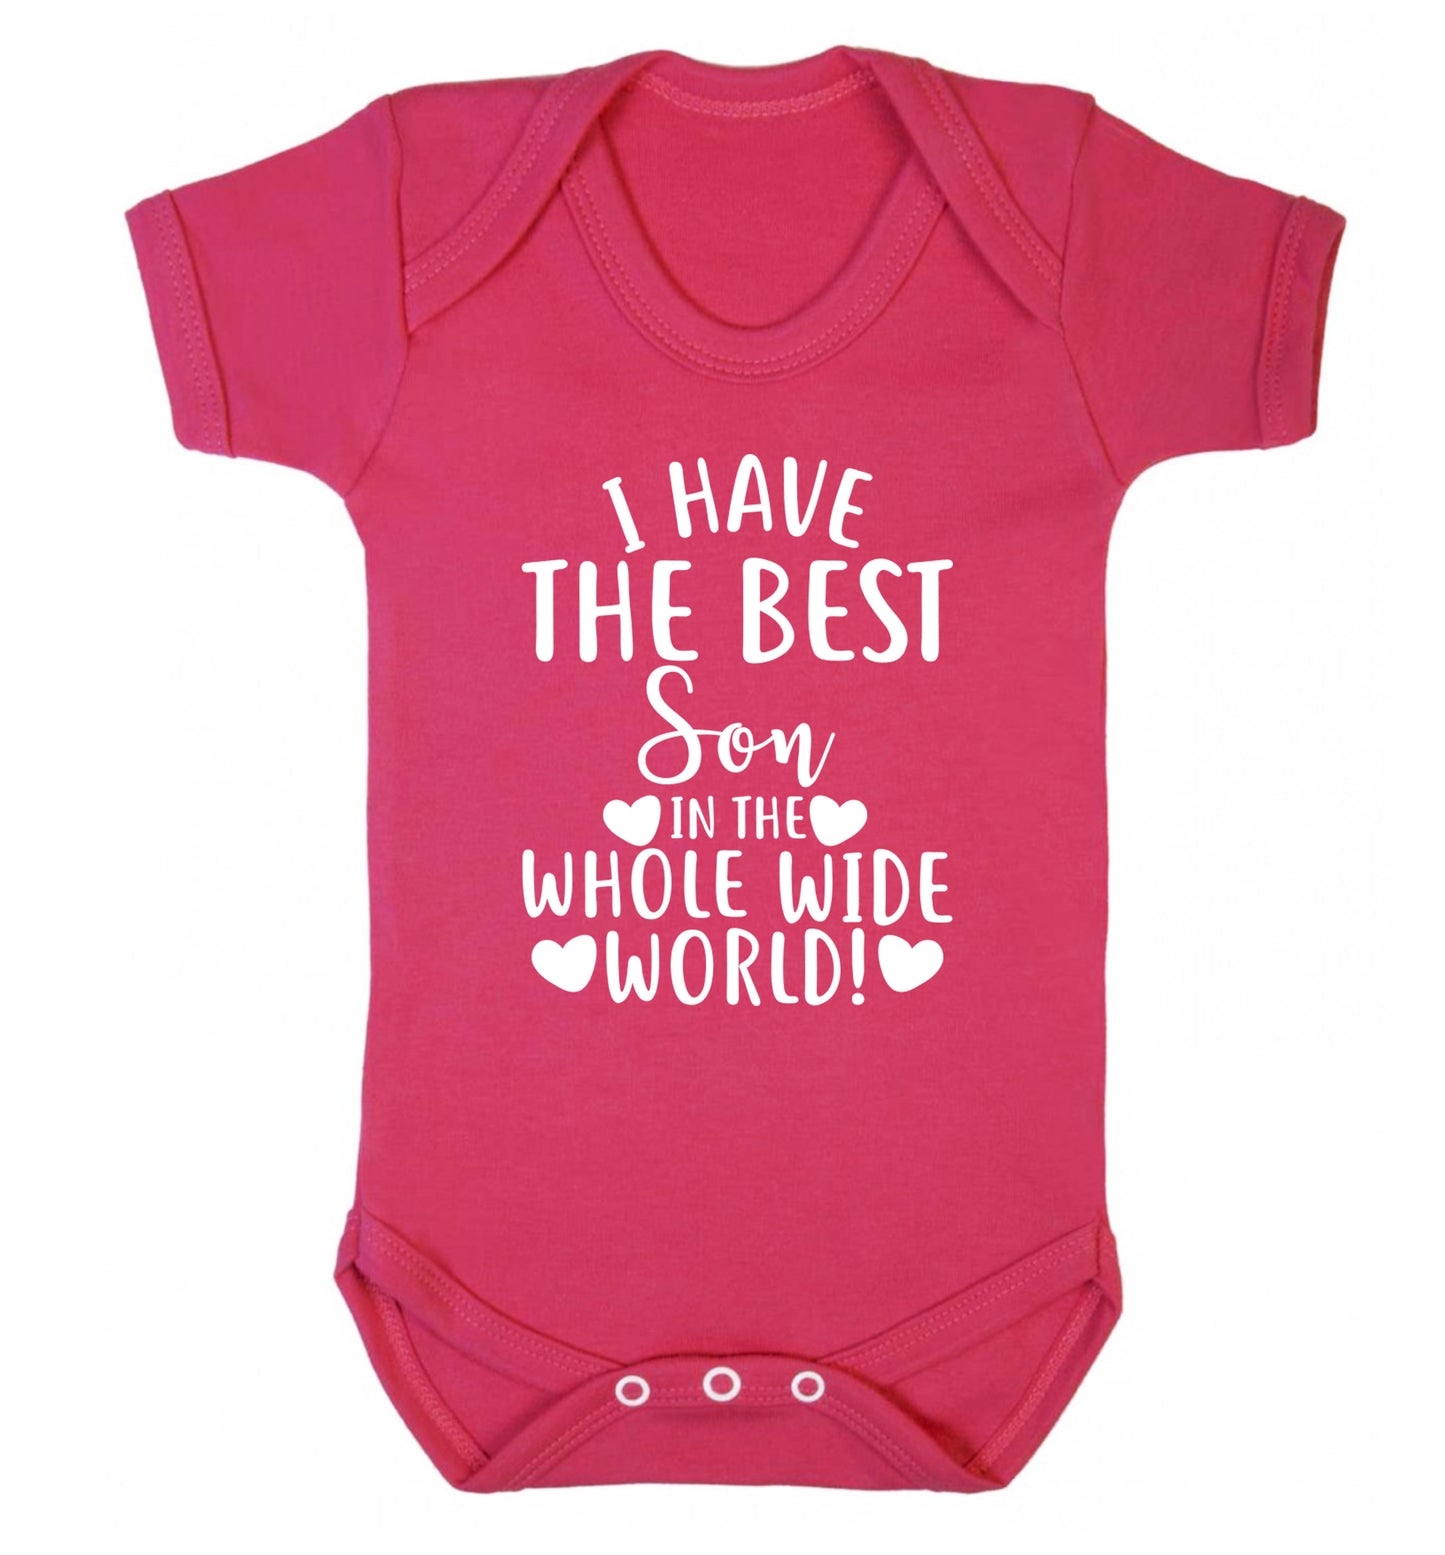 I have the best son in the whole wide world! Baby Vest dark pink 18-24 months